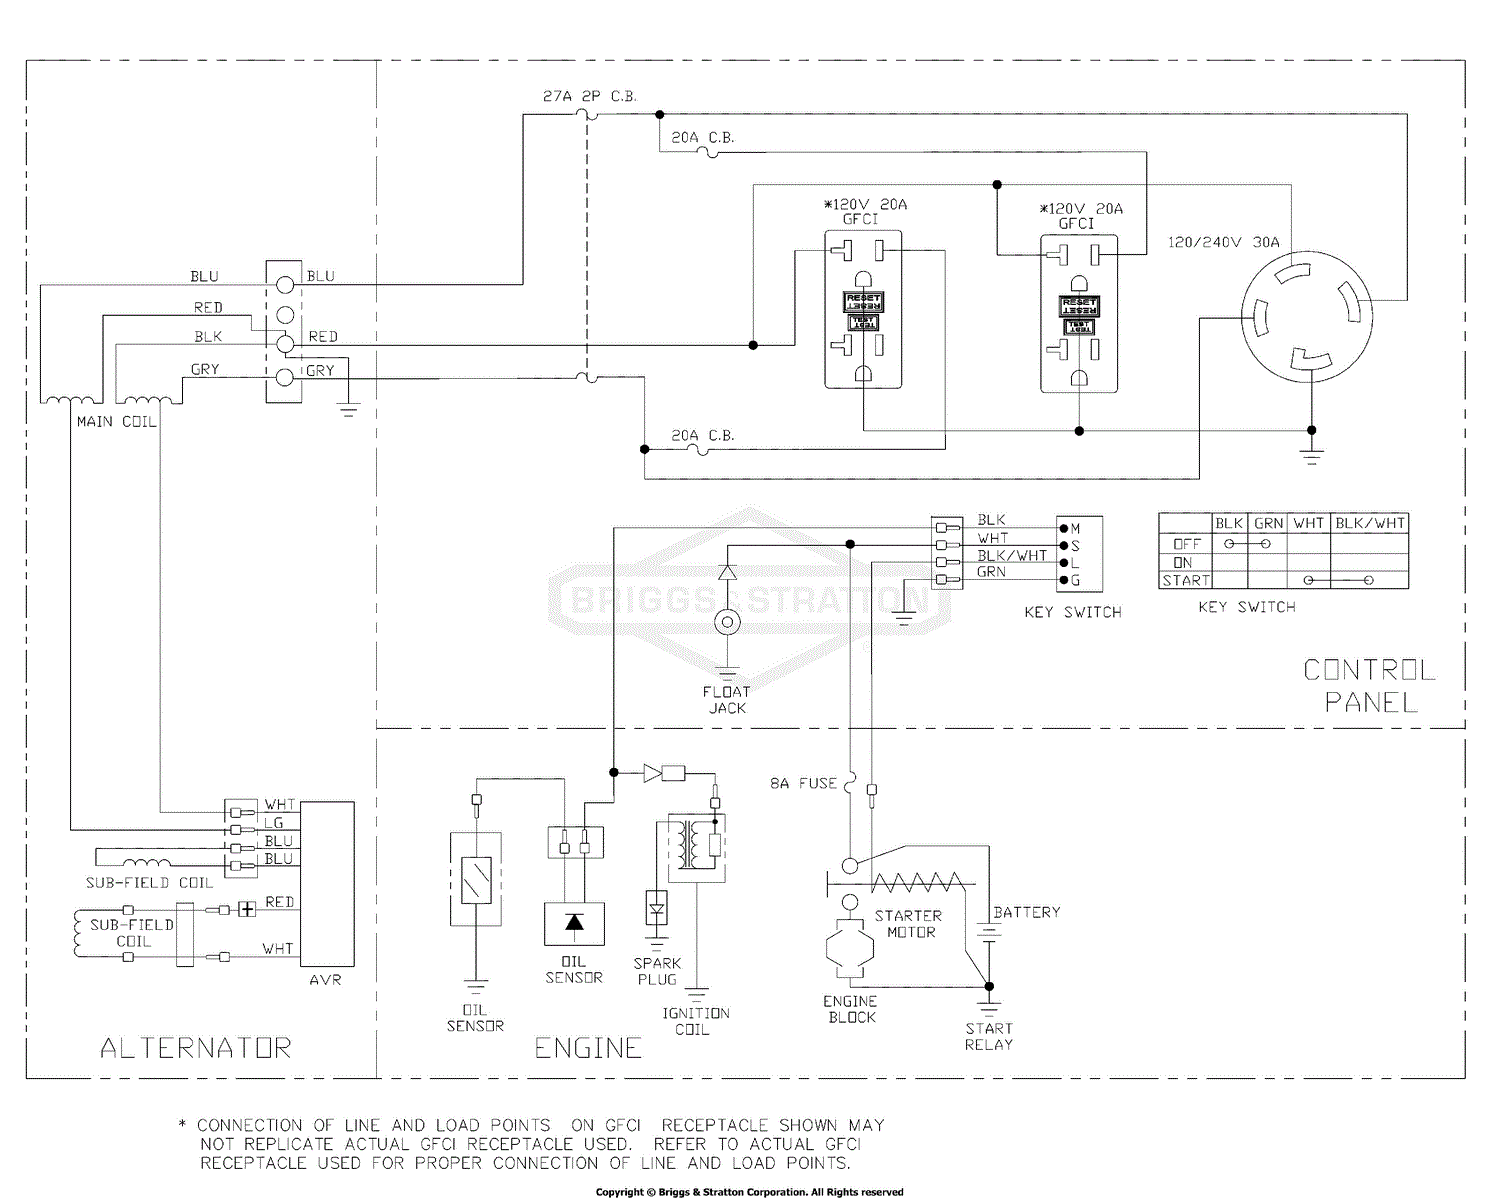 Diagram Briggs And Stratton Power Products 030651 00 Wiring Diagram Full Version Hd Quality Wiring Diagram Diagram3 Fete Services Aveyron Fr